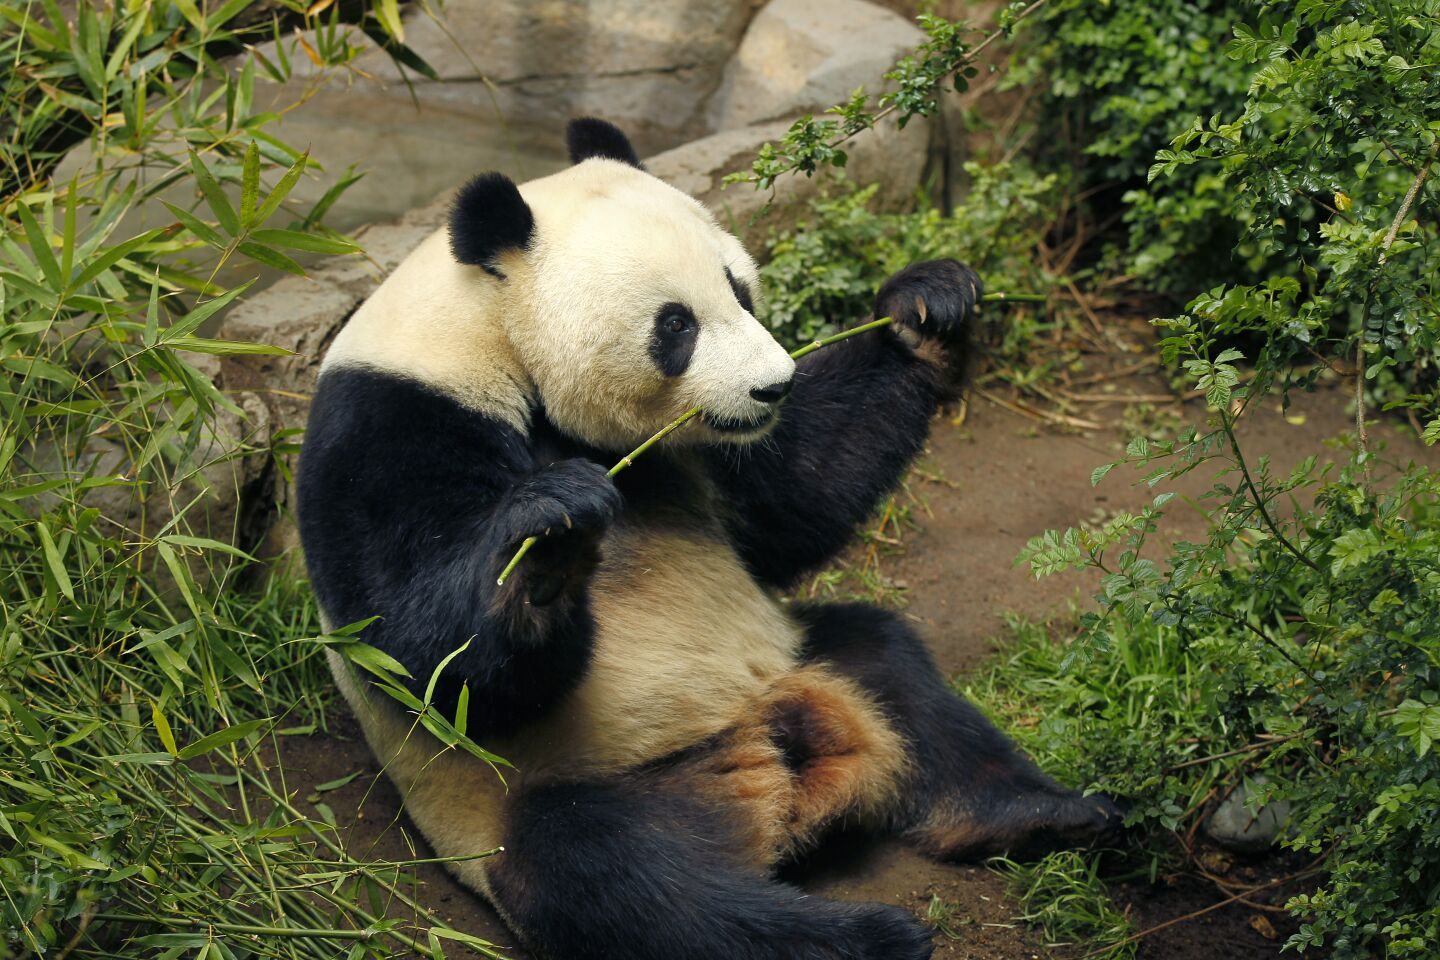 Panda Xiao Liwu, 6, eats bamboo in his enclosure at the San Diego Zoo on April 16, 2019. The last public day to see Xiao Liwu and his mom Bai Yun is April 29th, before they head back to China.